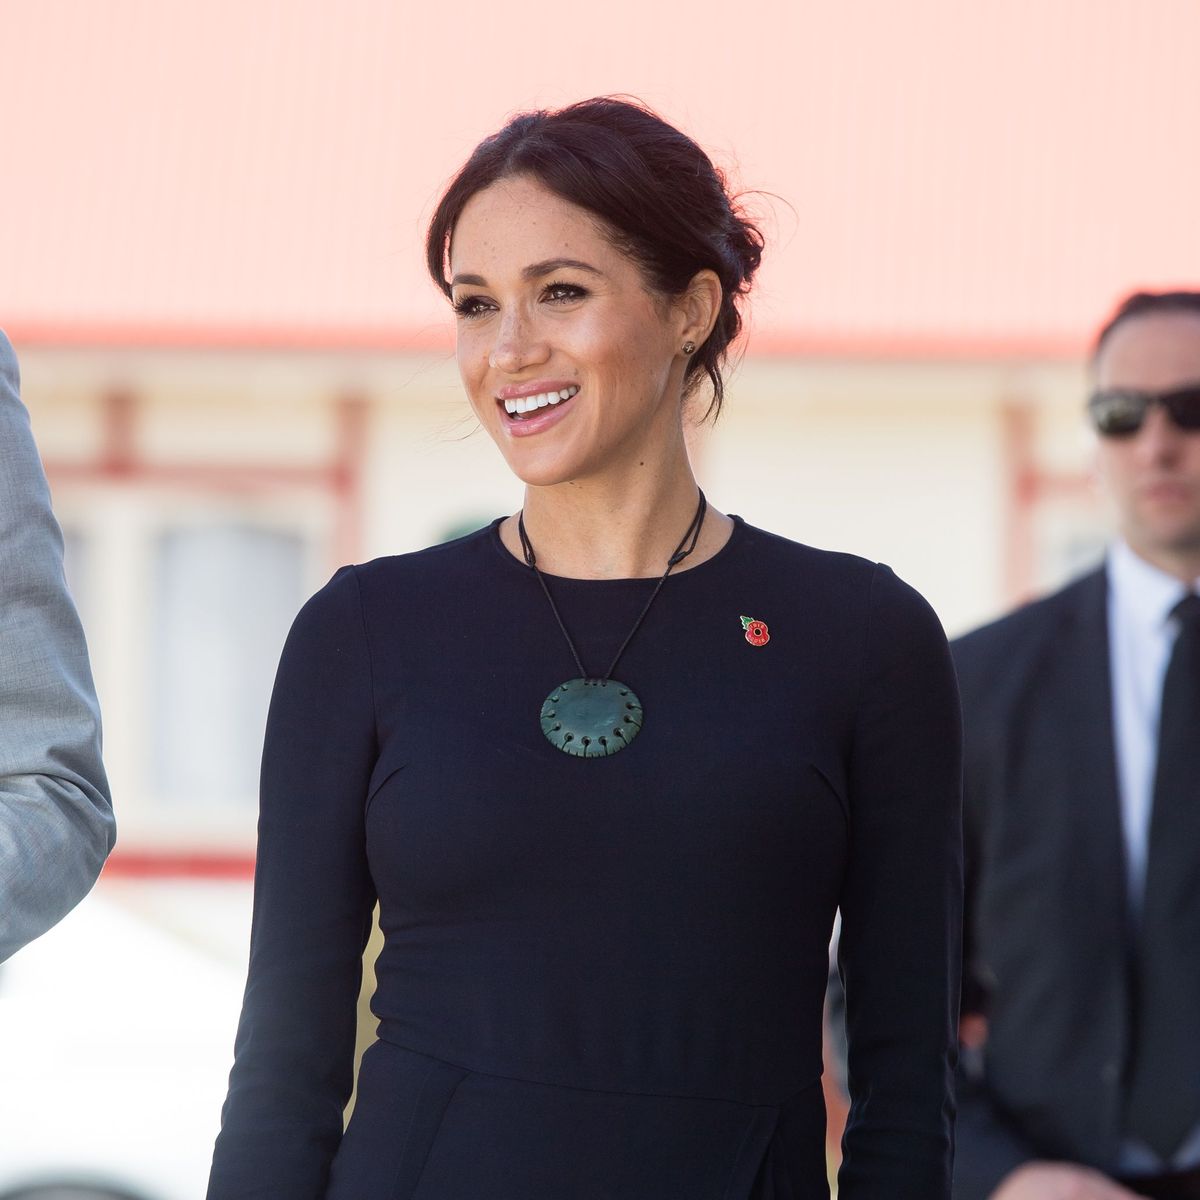 Meghan Markle Keeps Her Cool as Royal Family Fans Sing 'Suits' Theme ...